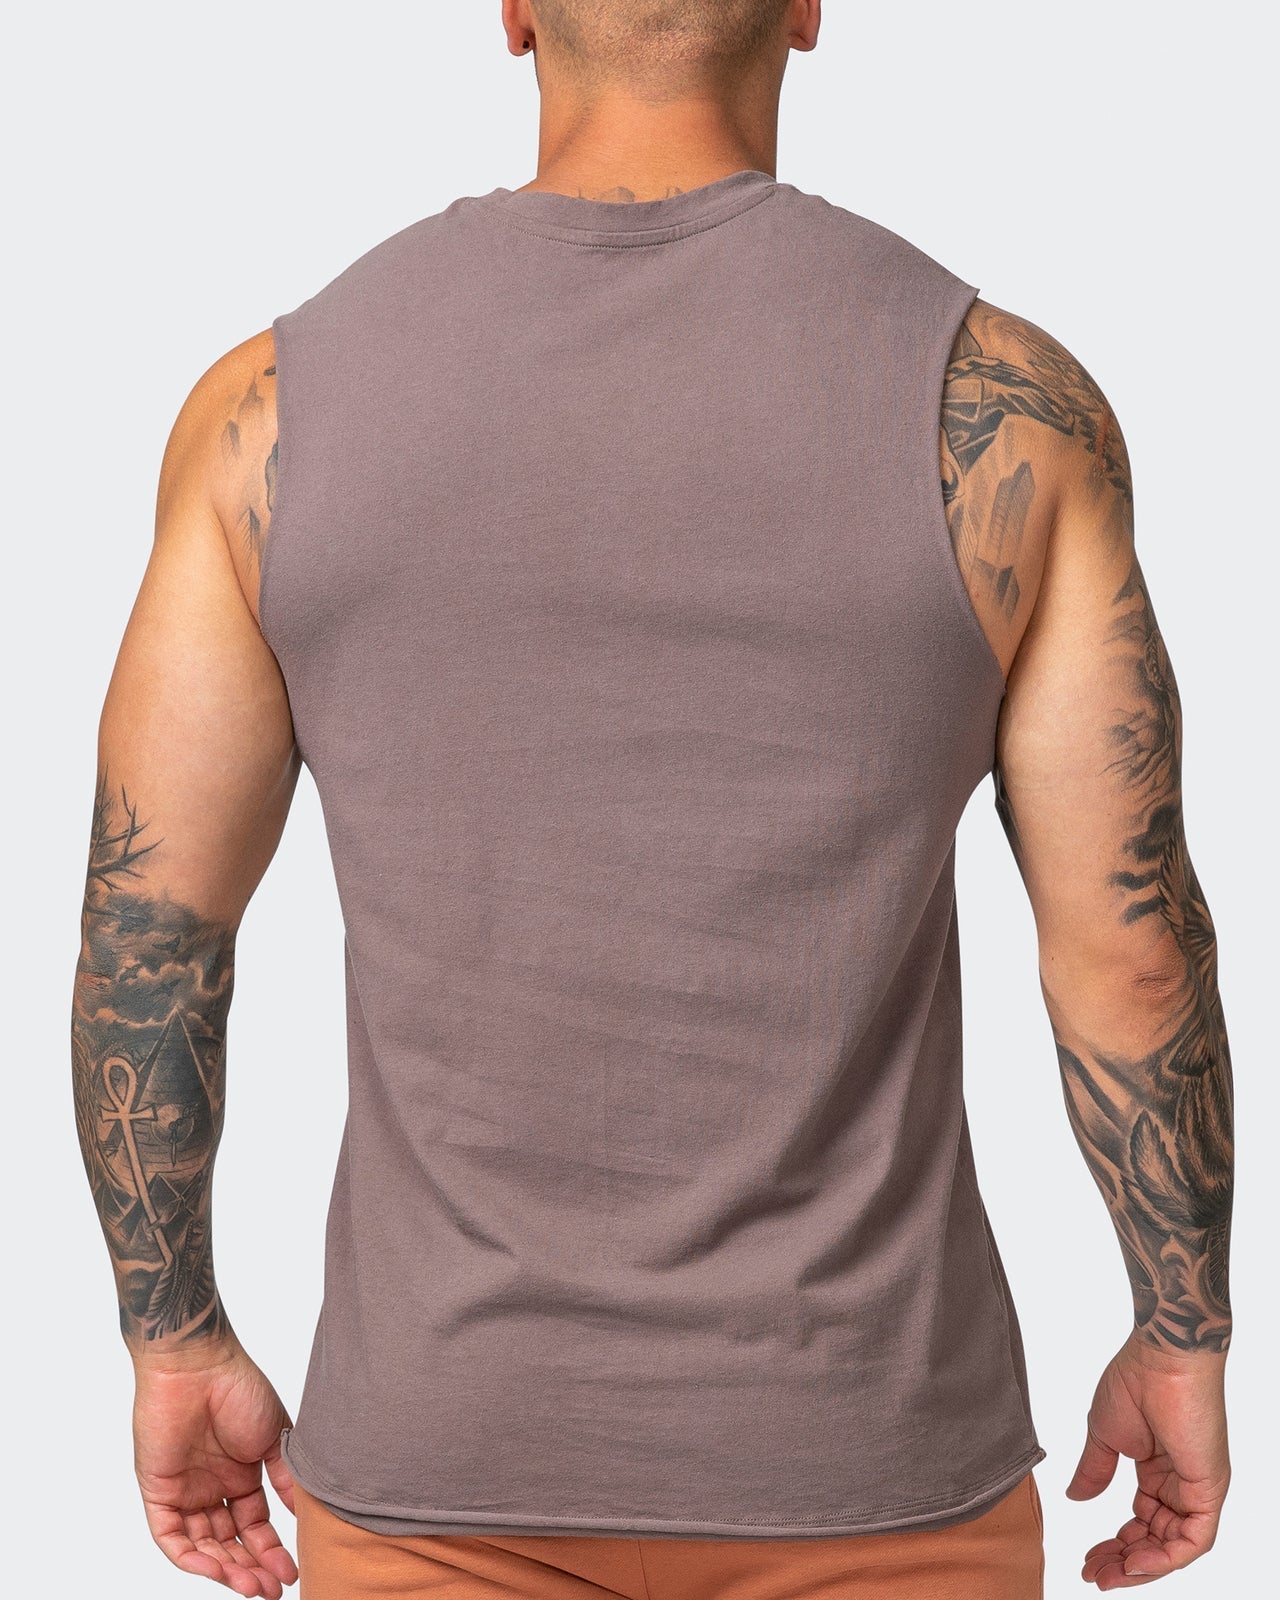 musclenation Activewear Classic Vintage Tank - Dark Taupe